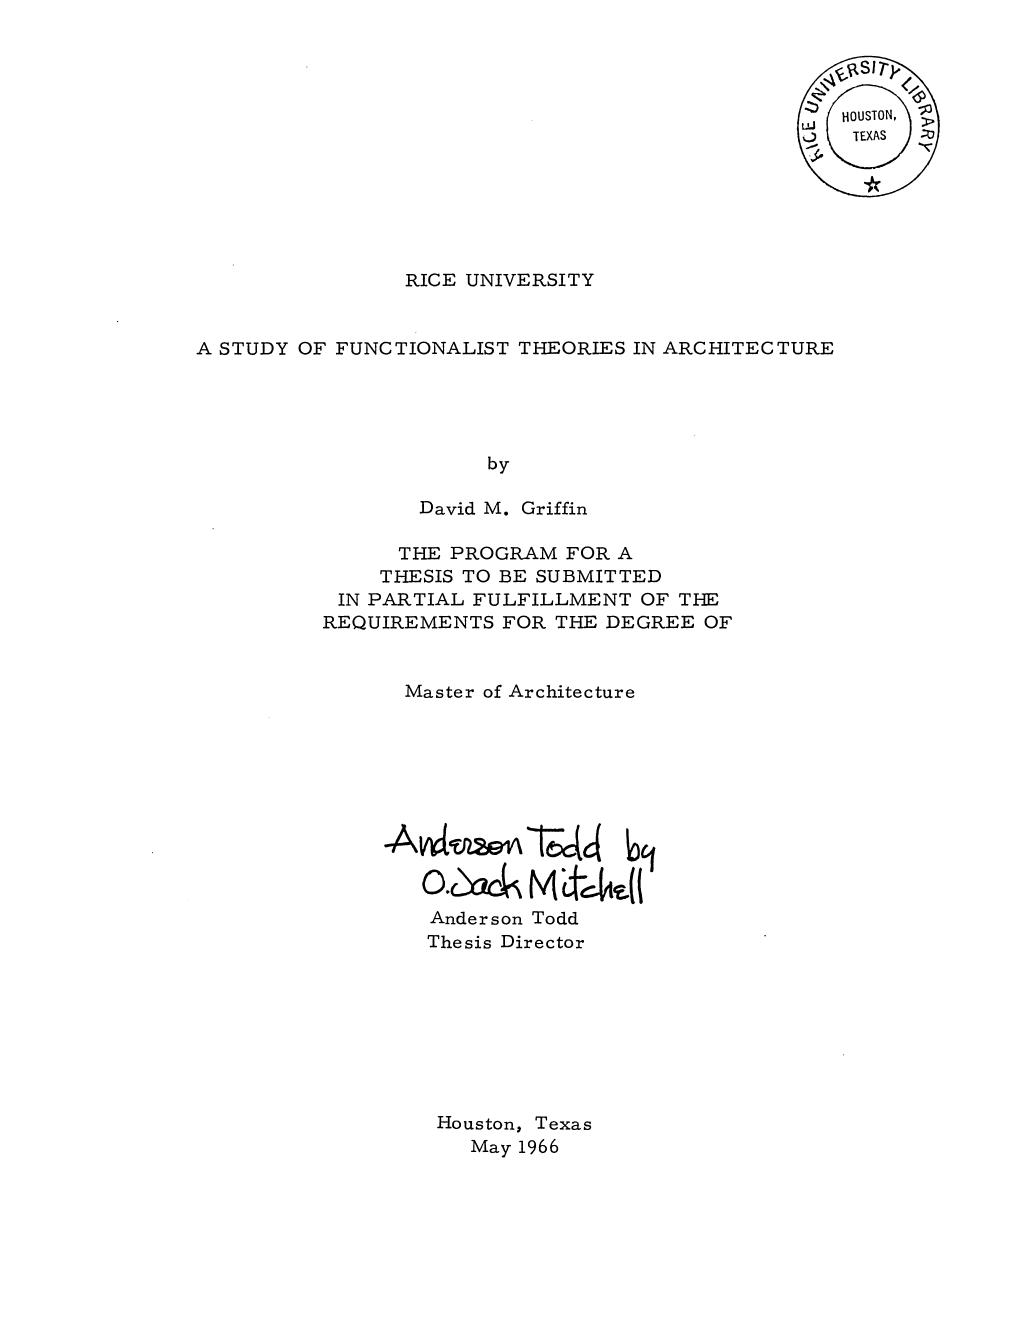 A Study of Functionalist Theories in Architecture